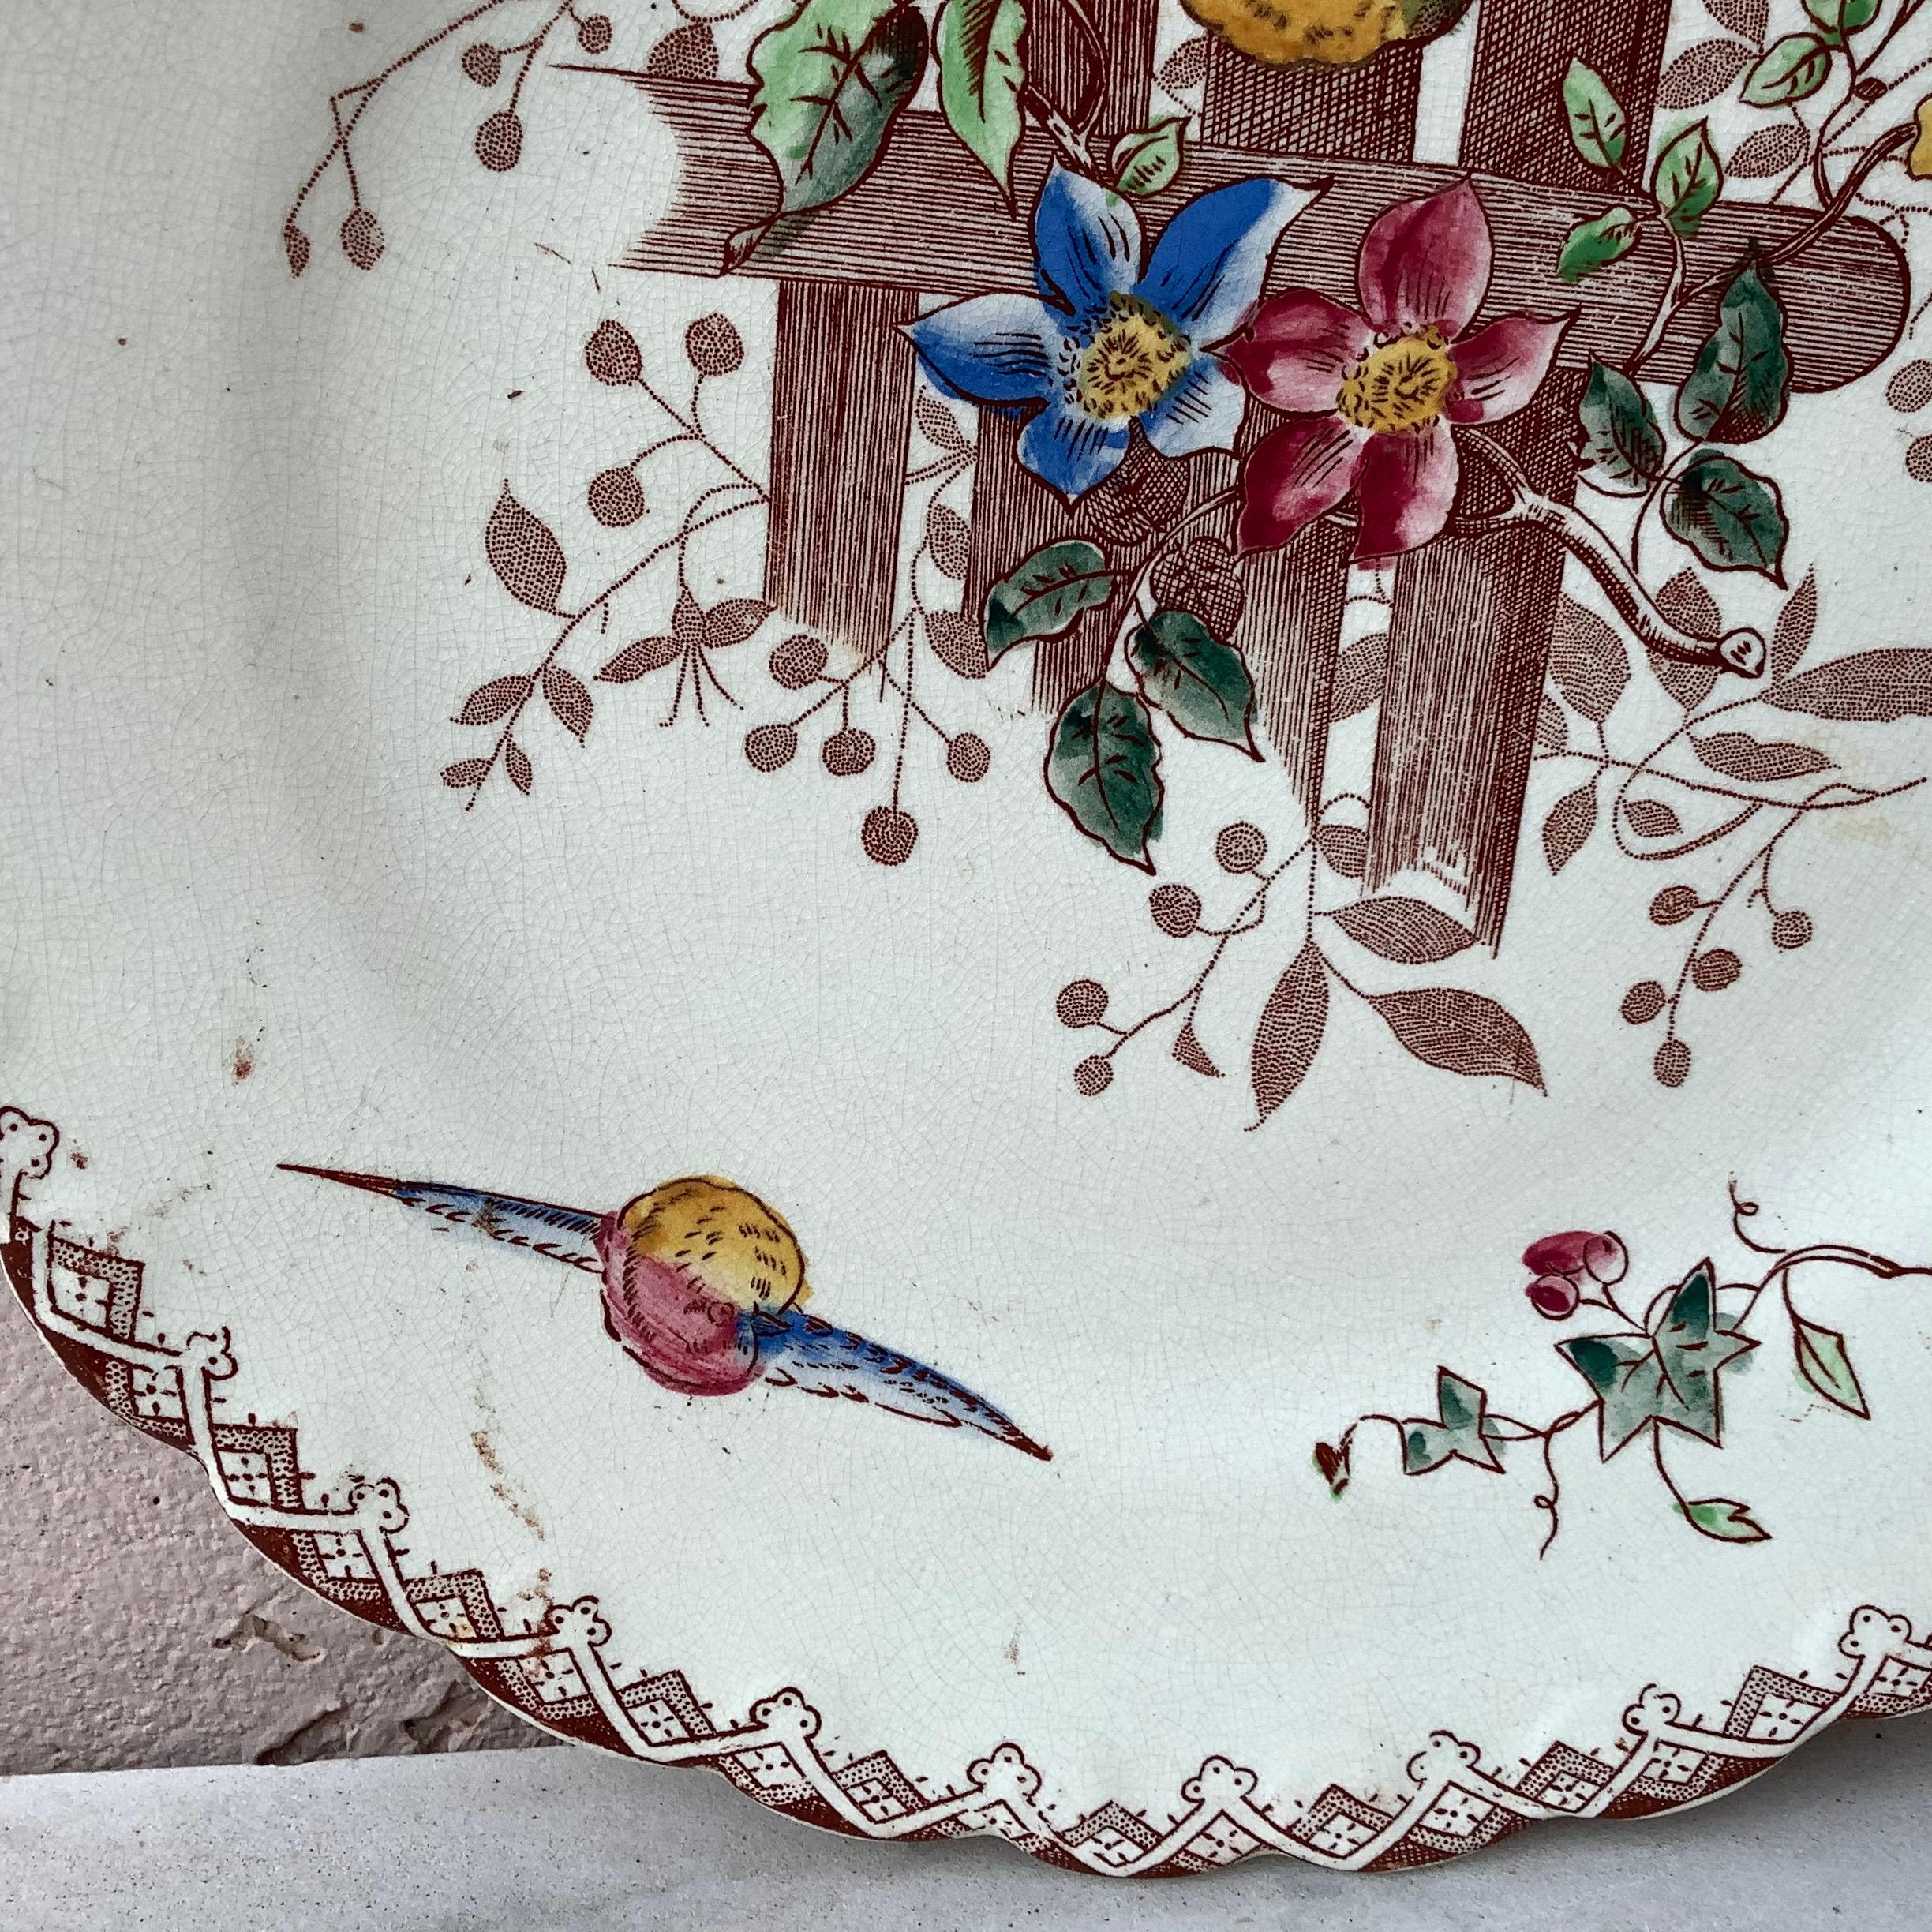 French faience plate with birds and flowers onnaing, circa 1900.